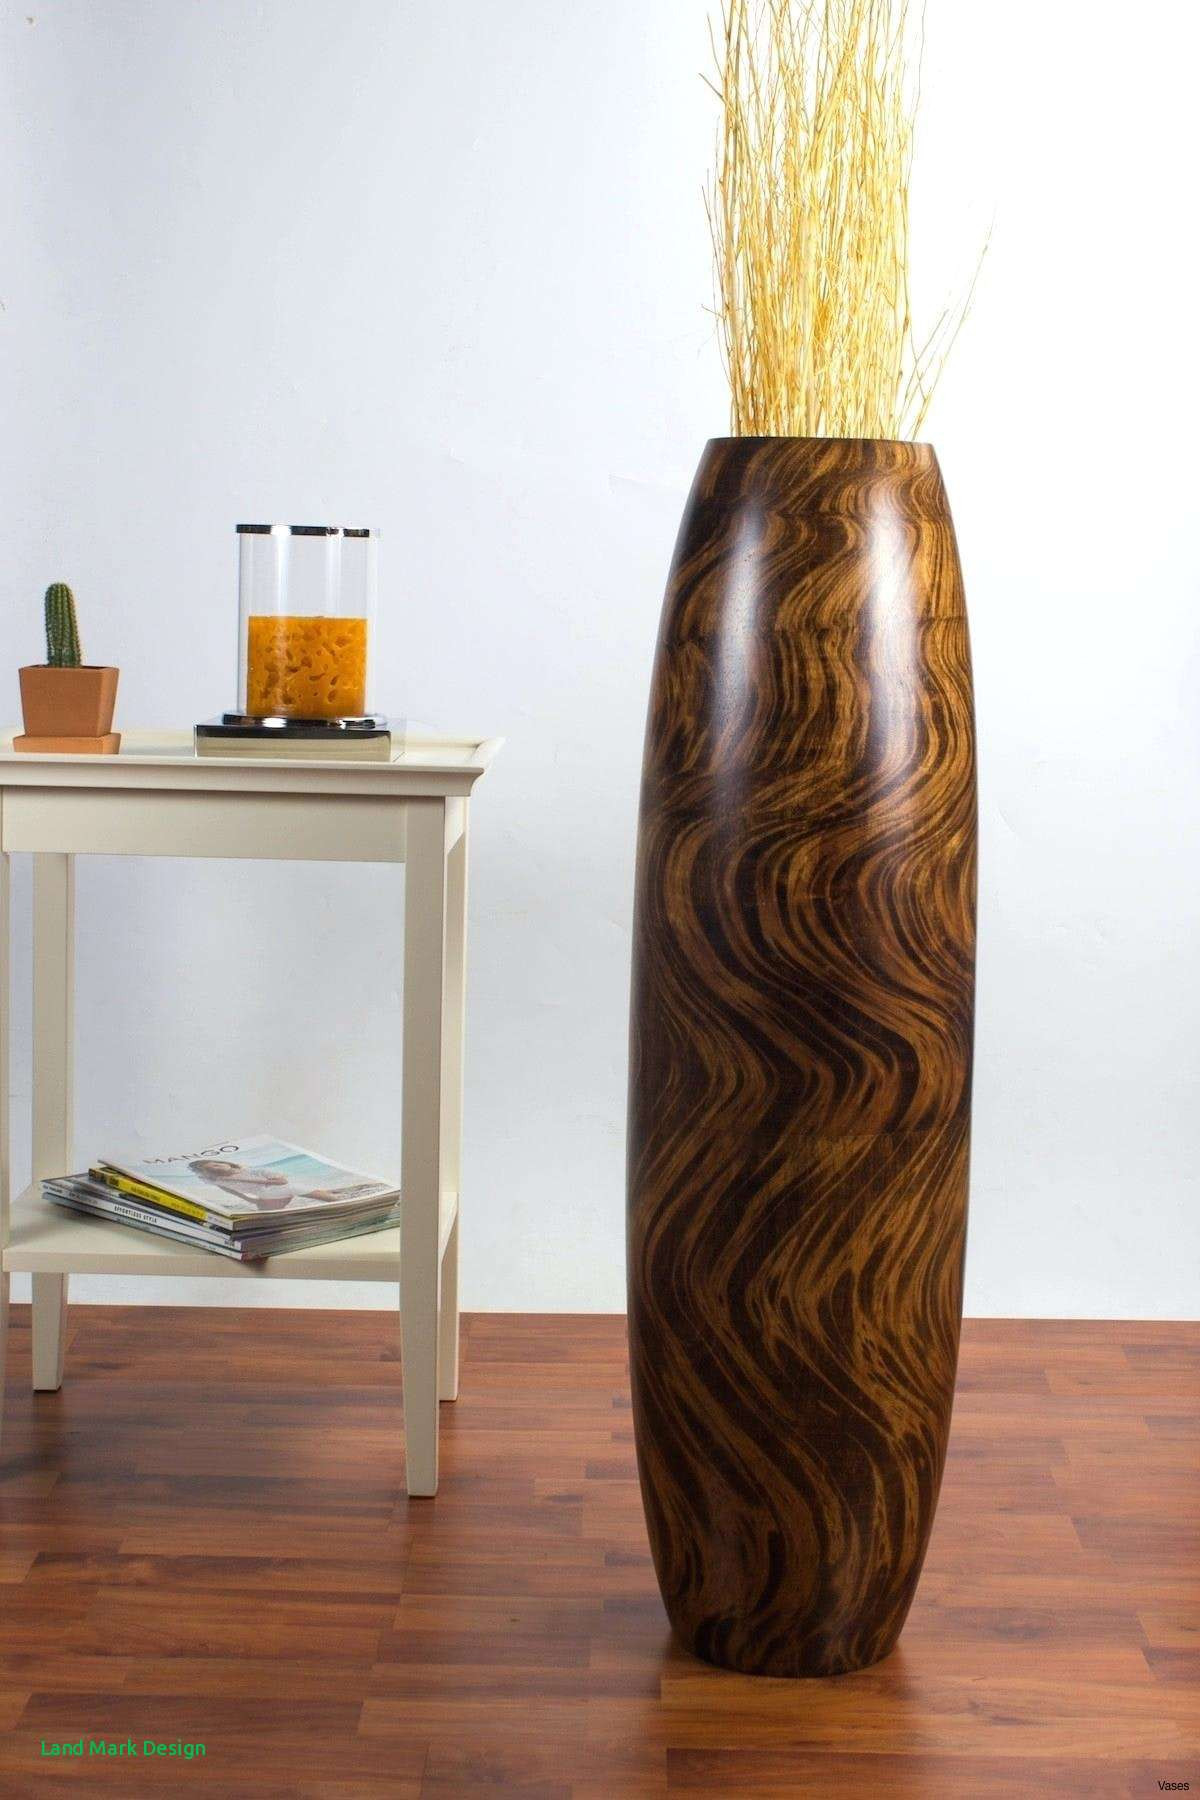 standing vases for living room of giant floor vase collection vase decoration at home h vases giant intended for giant floor vase pictures silver floor vase design of giant floor vase collection vase decoration at